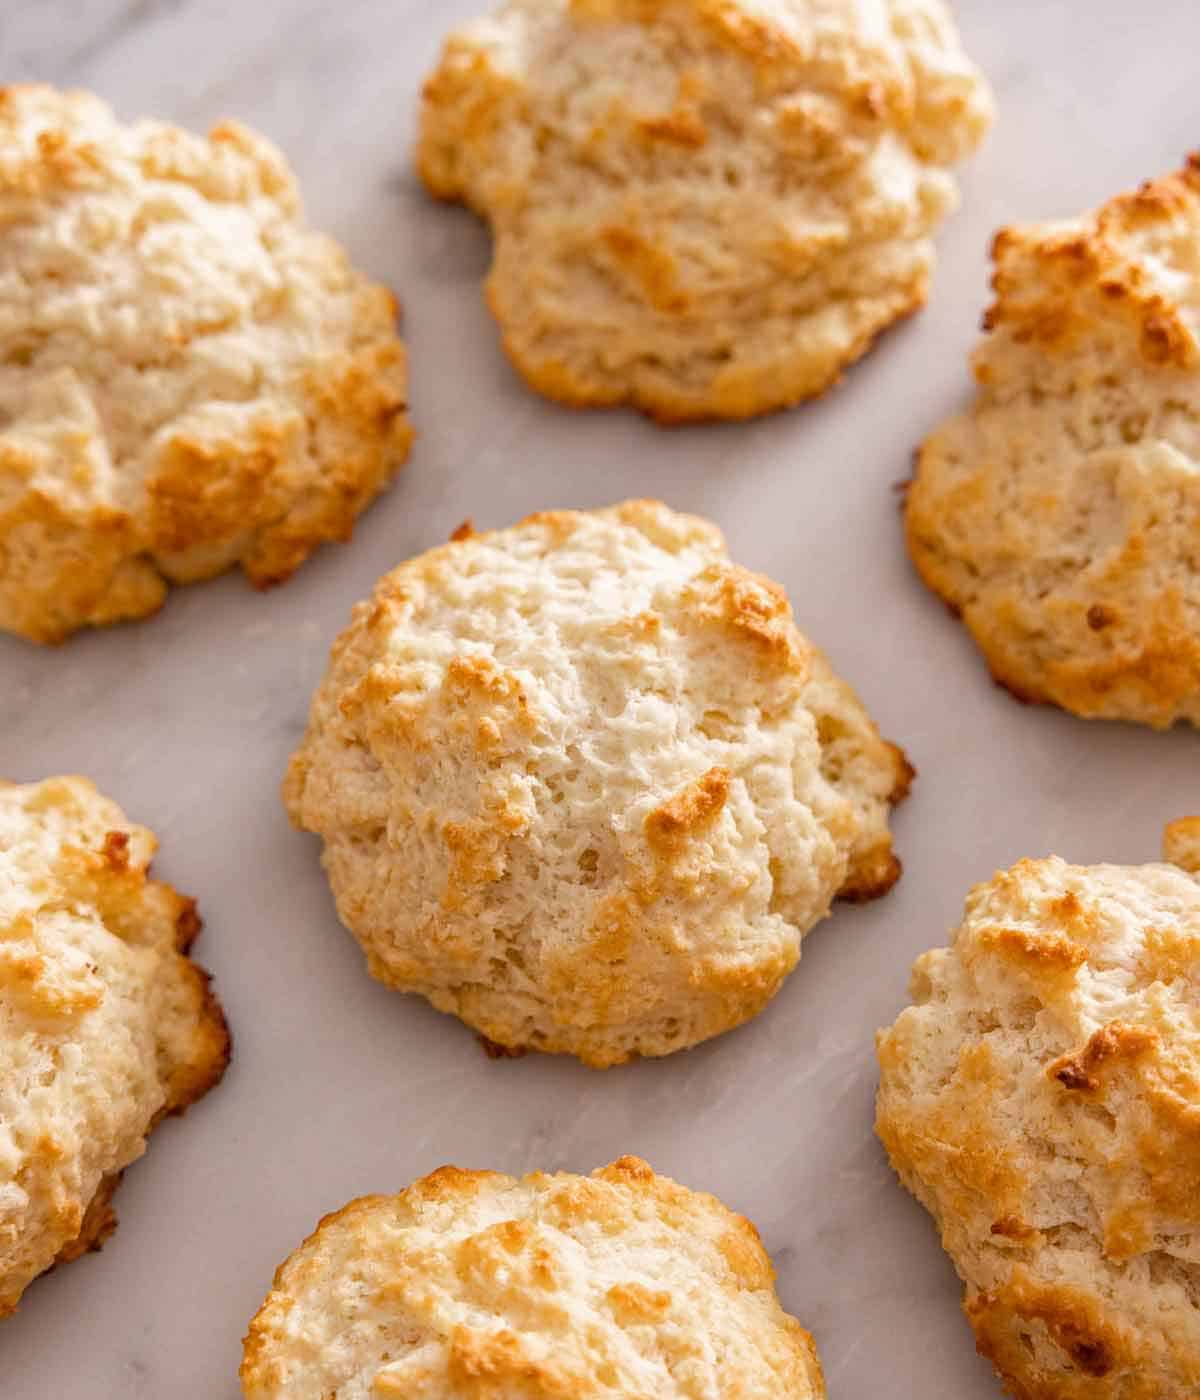 Multiple drop biscuits in a single layer on a marble surface.